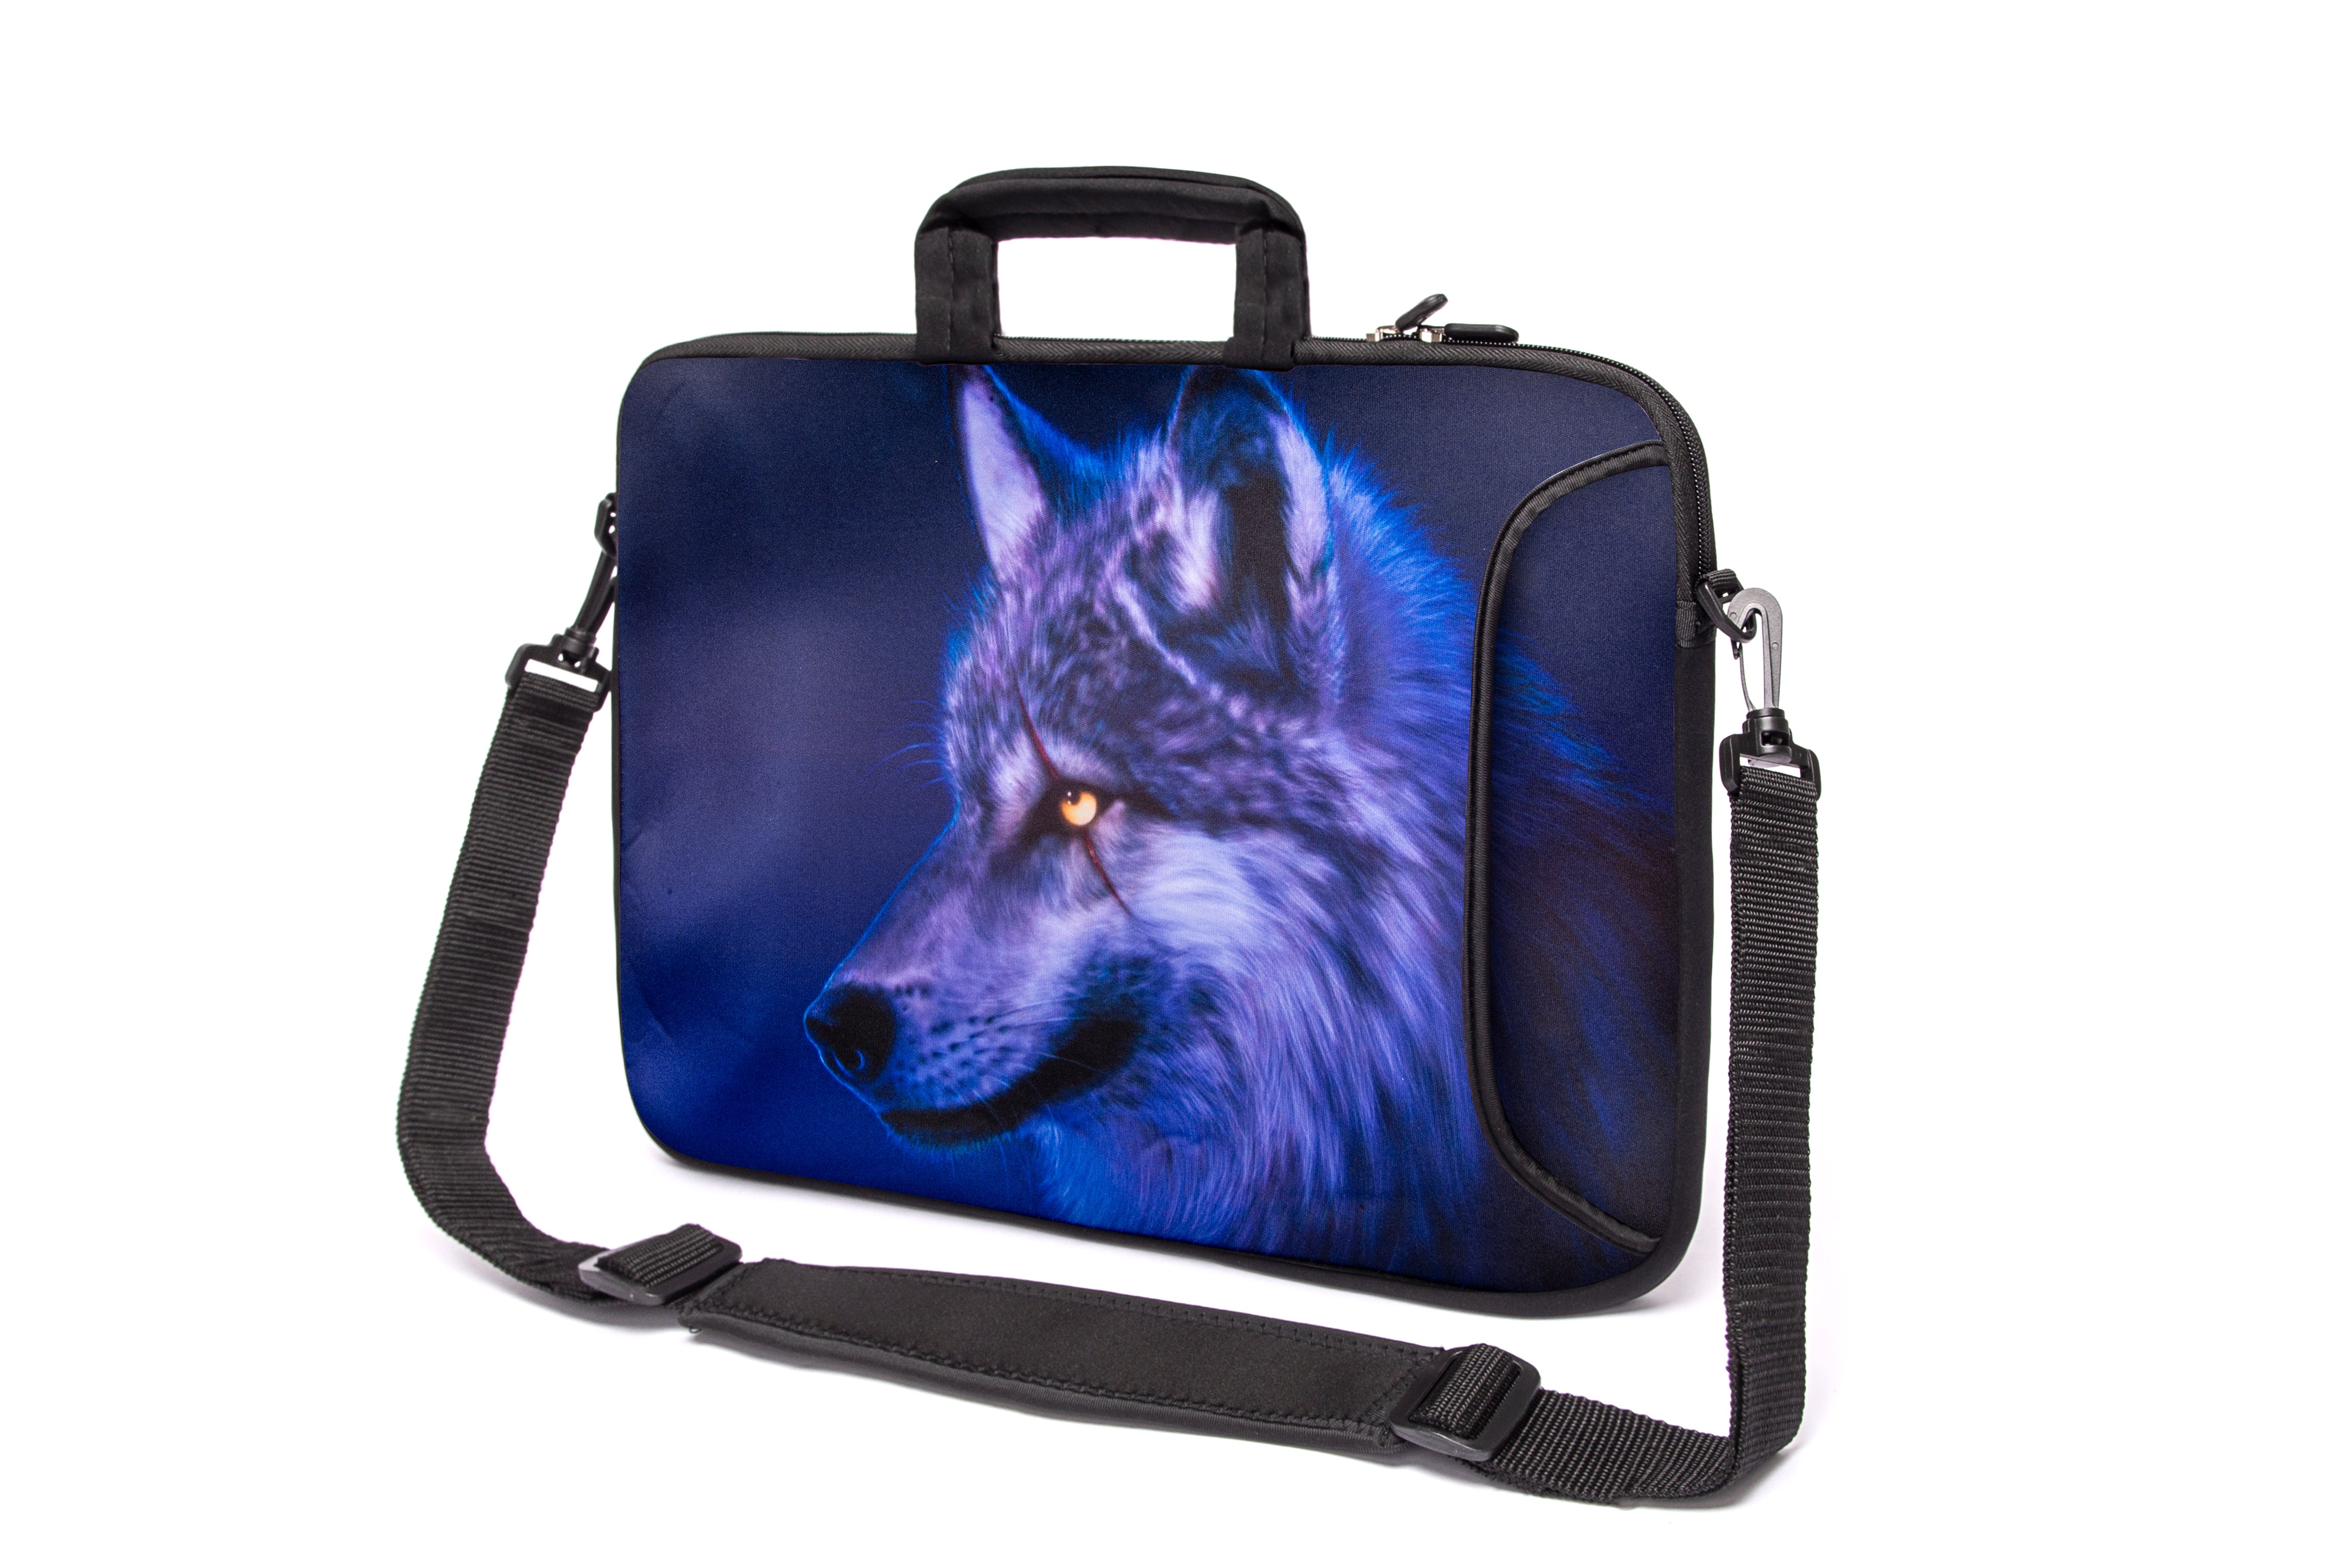 15"- 15.6" (inch) LAPTOP BAG CARRY CASE/BAG WITH HANDLE & STRAP NEOPRENE FOR LAPTOPS/NOTEBOOKS, *Wolf*